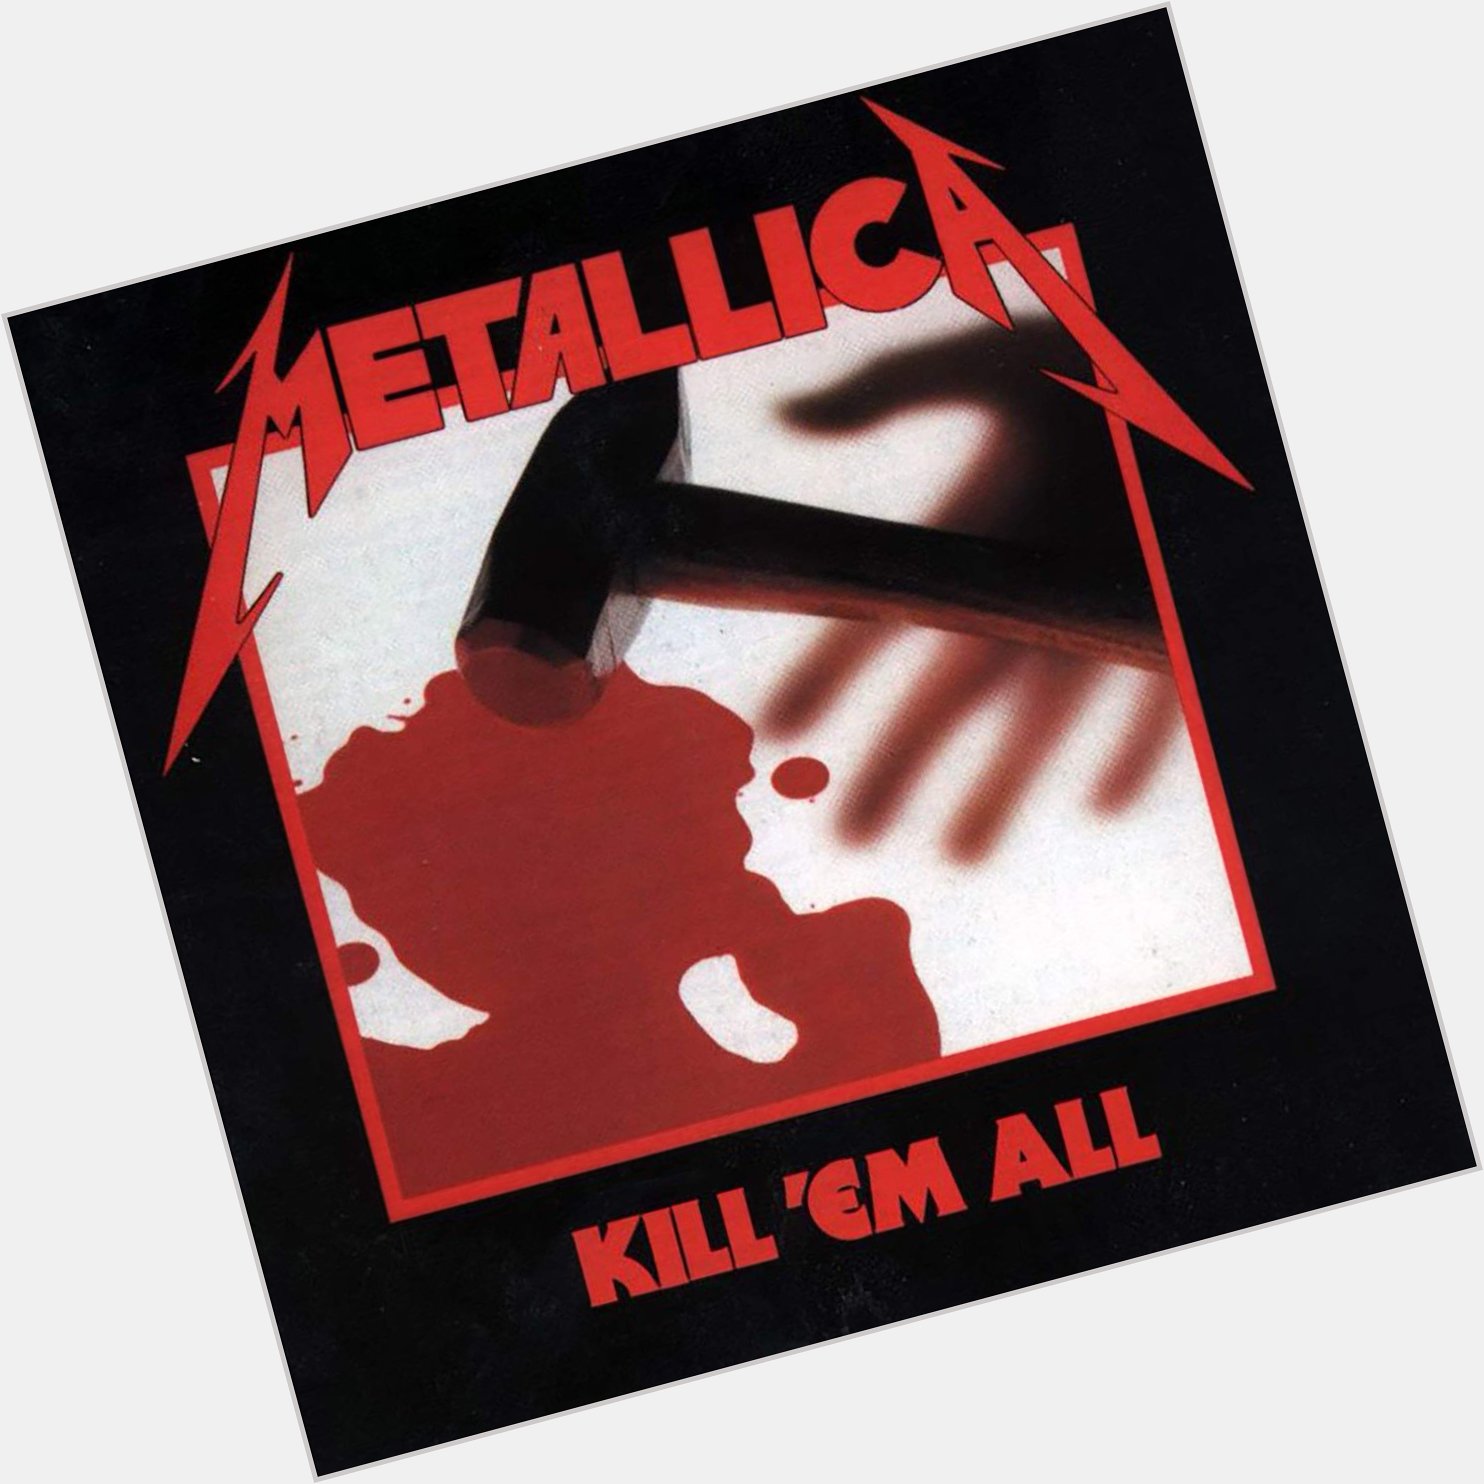  Hit The Lights
from Kill \Em All
by Metallica

Happy Birthday, Lars Ulrich         Metallica      